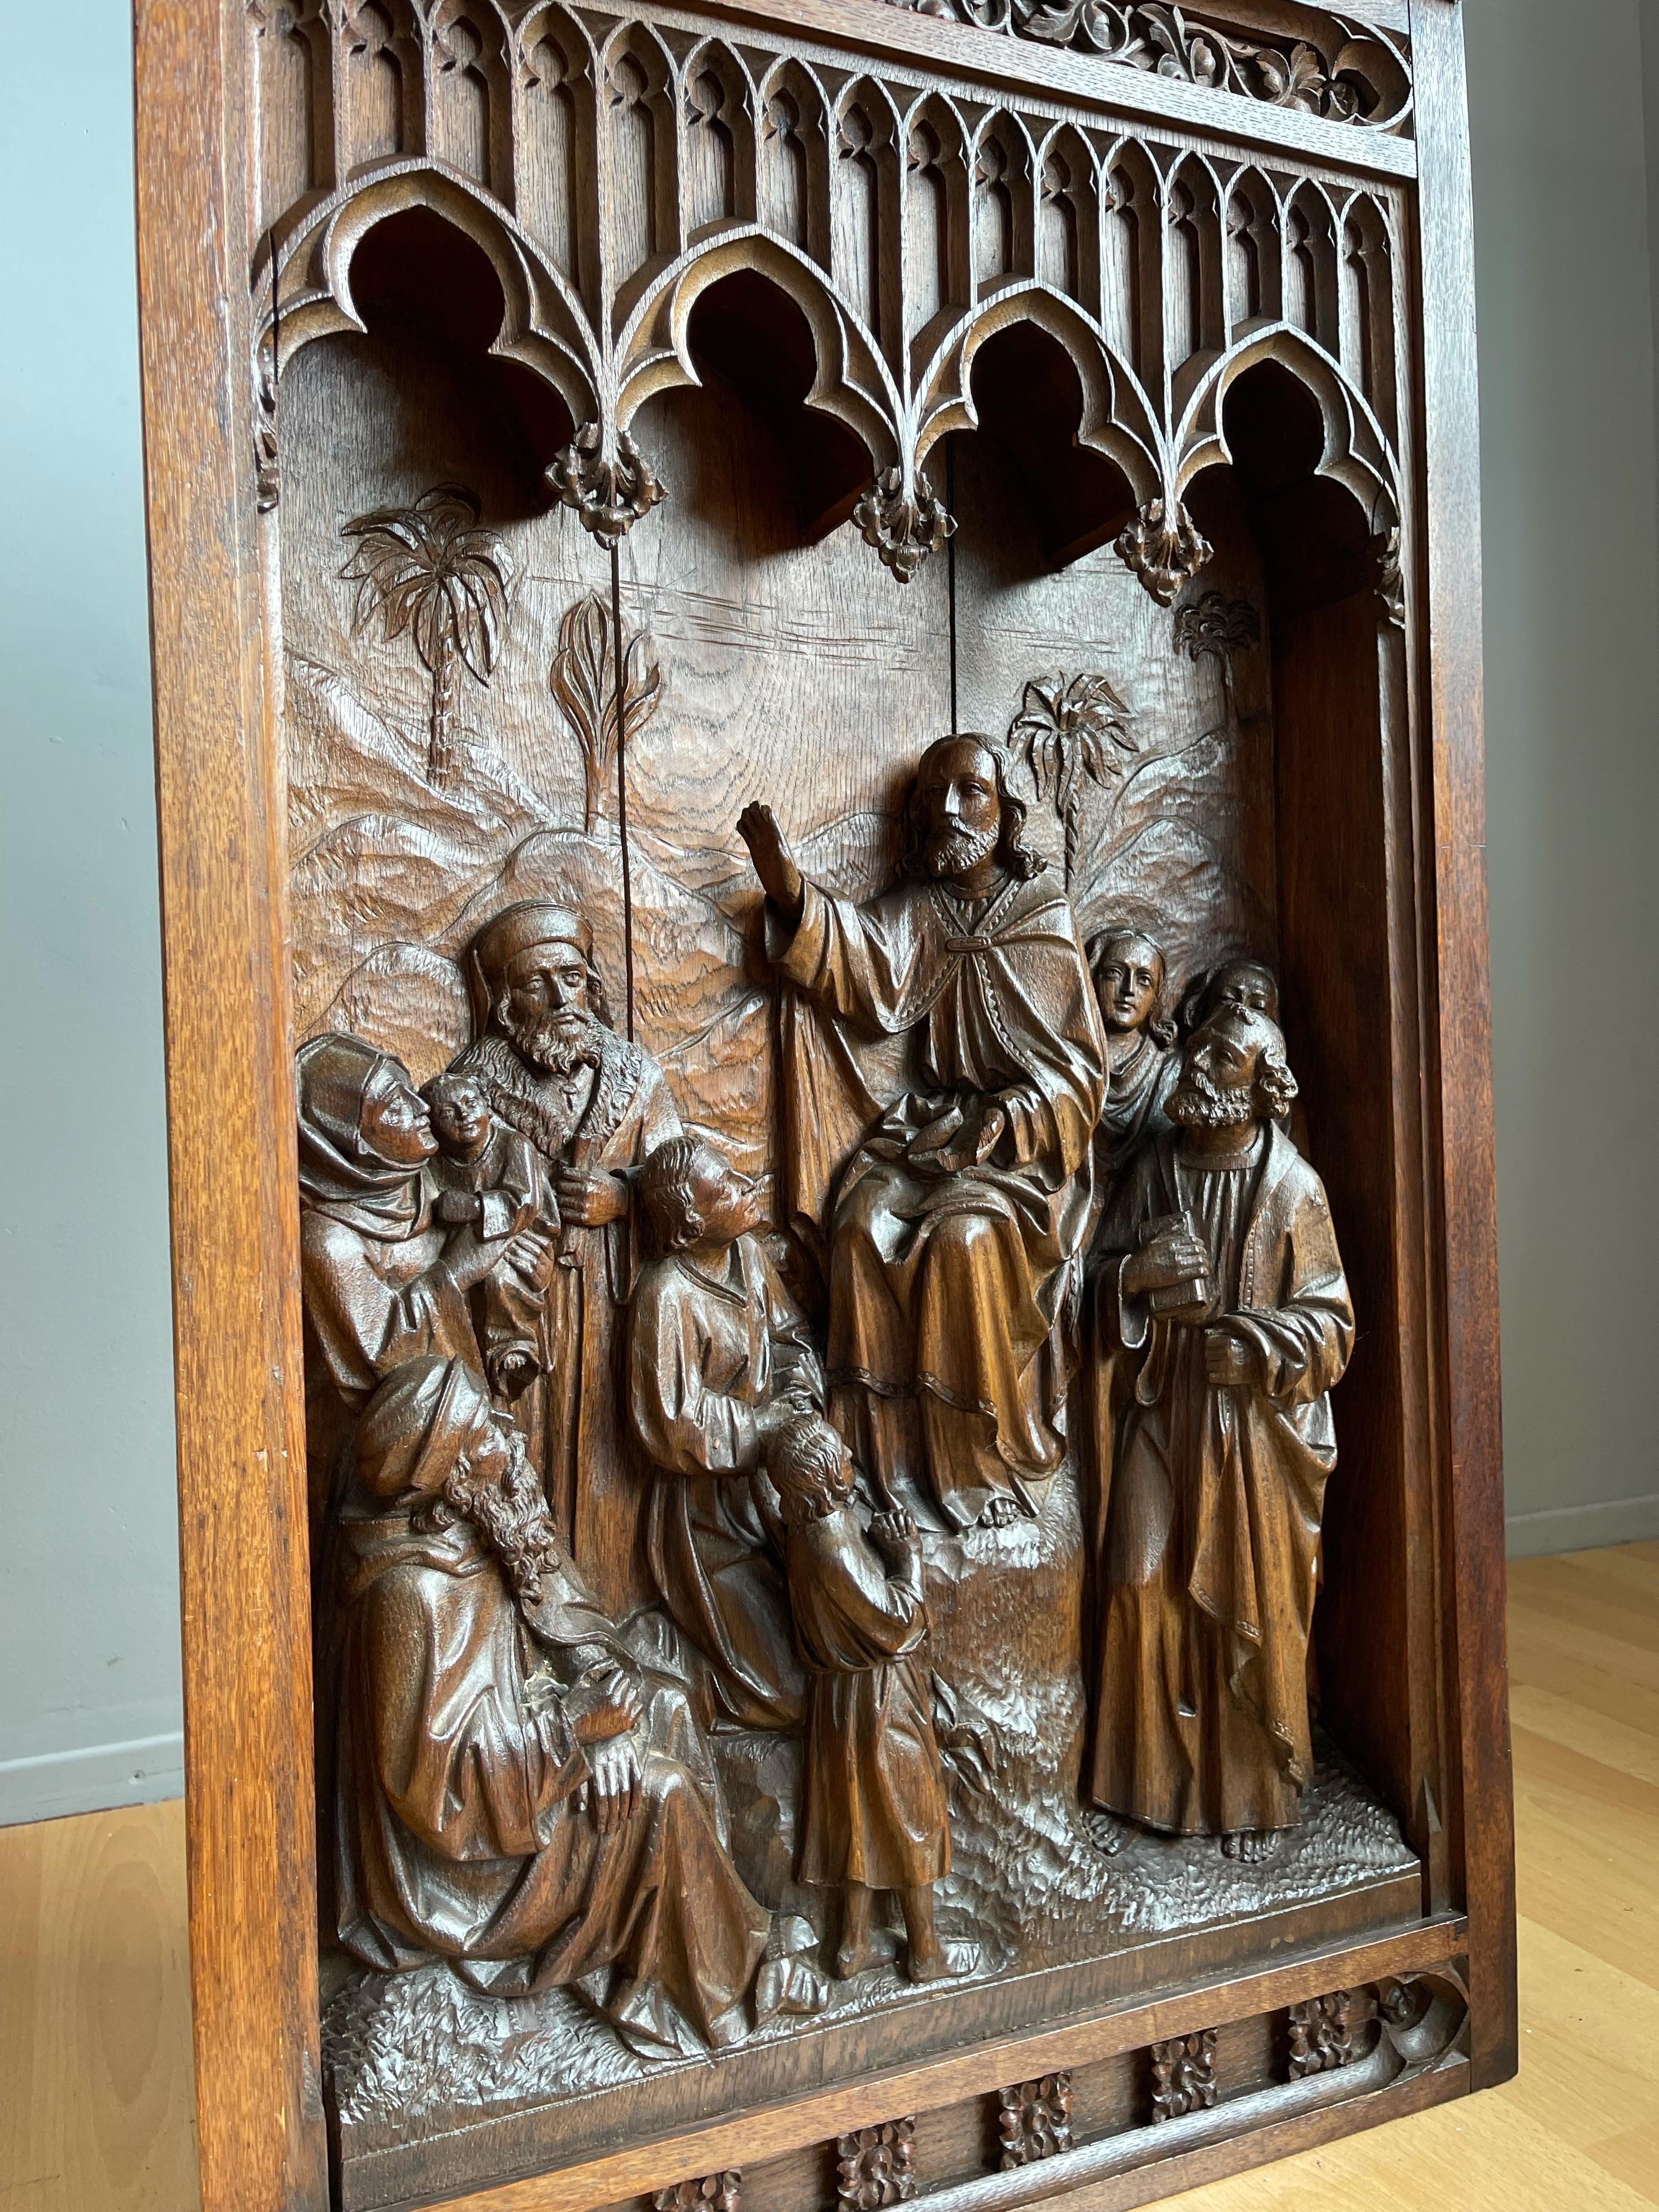 Gothic Revival 'sermon on the mount' wall plaque with Jesus teaching.

This large size work of religious art depicts Jesus and He is surrounded by both grown-ups and children on either side. This Gothic church wall panel looks to be from the Dutch